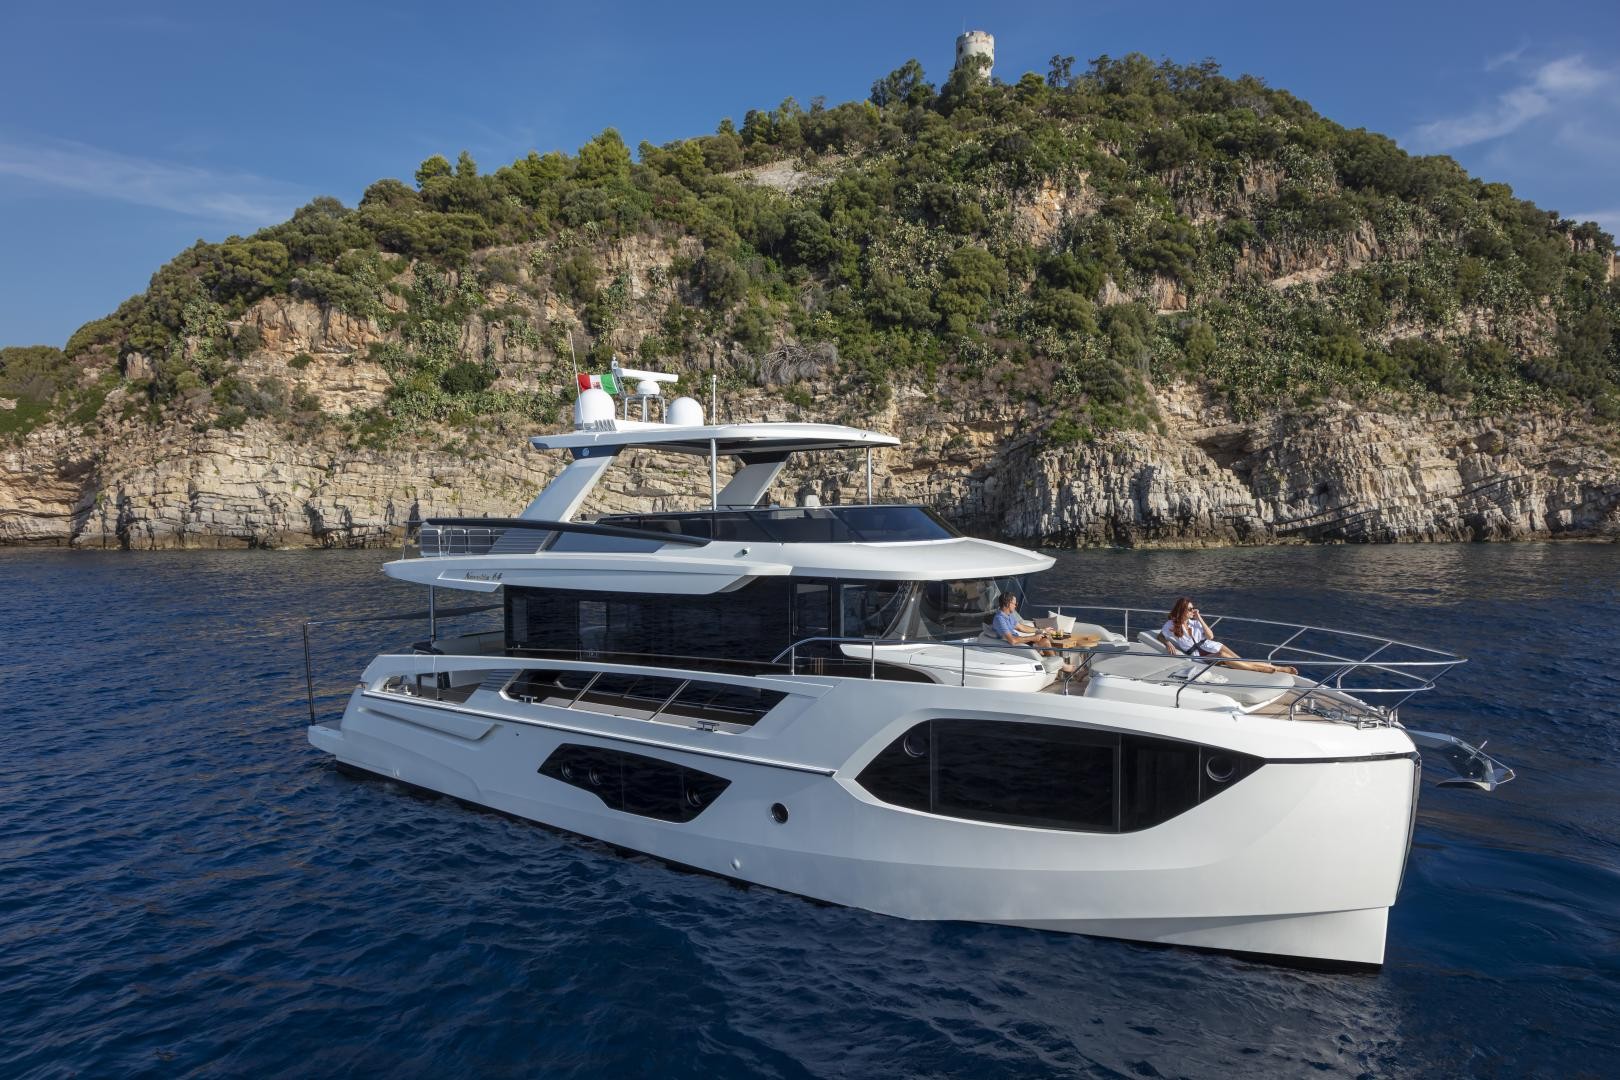 Best of Boats Award 2020 - Absolute Navetta 64 is the 'Best for Travel'